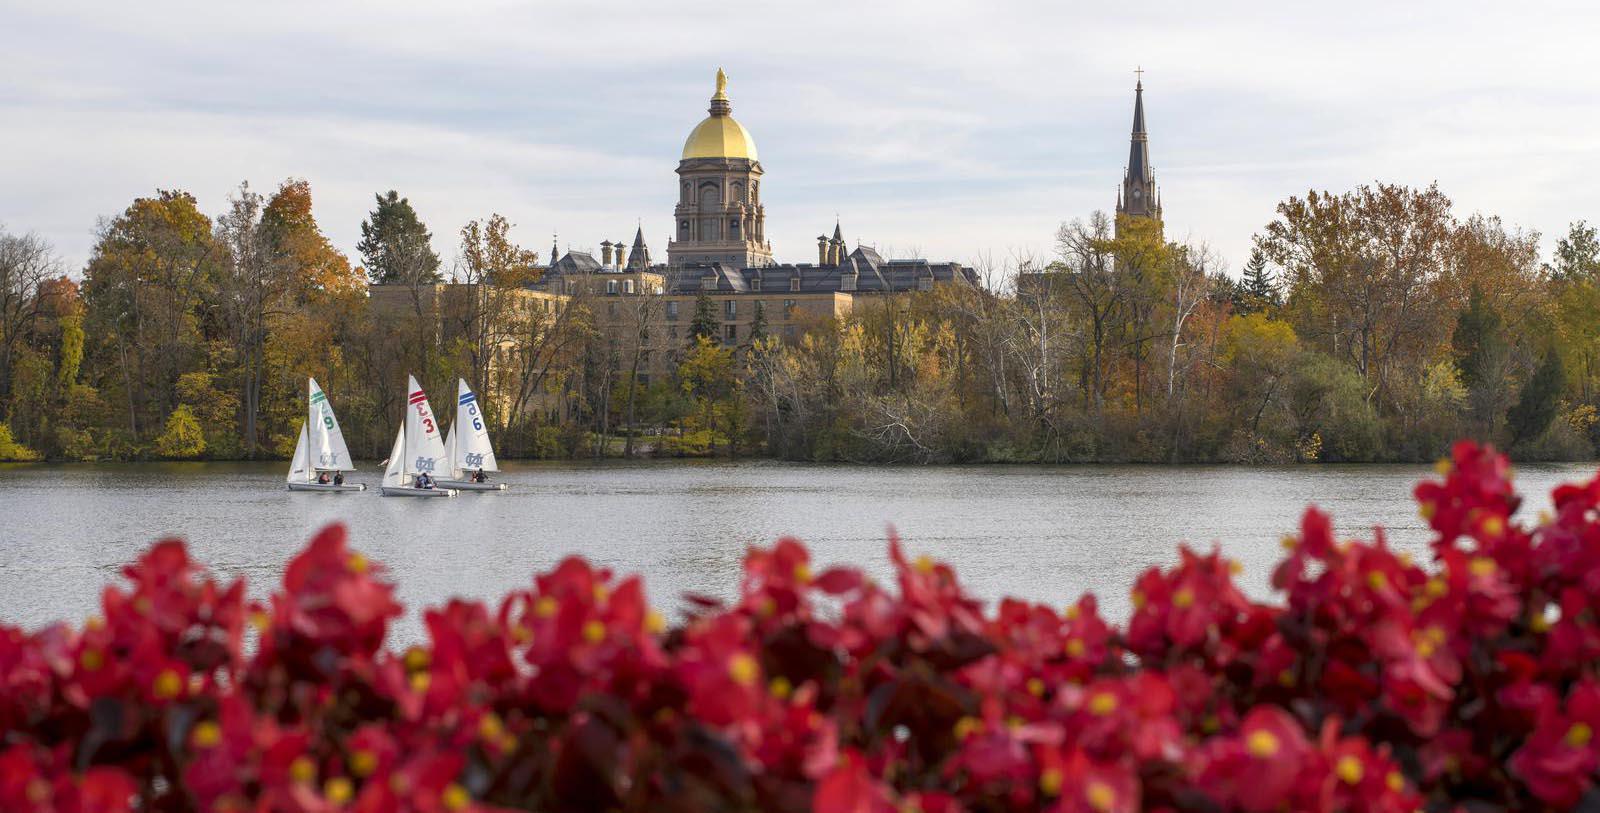 Discover the Morris Inn at Notre Dame, which is located on one of the most beautiful college campuses in the United States